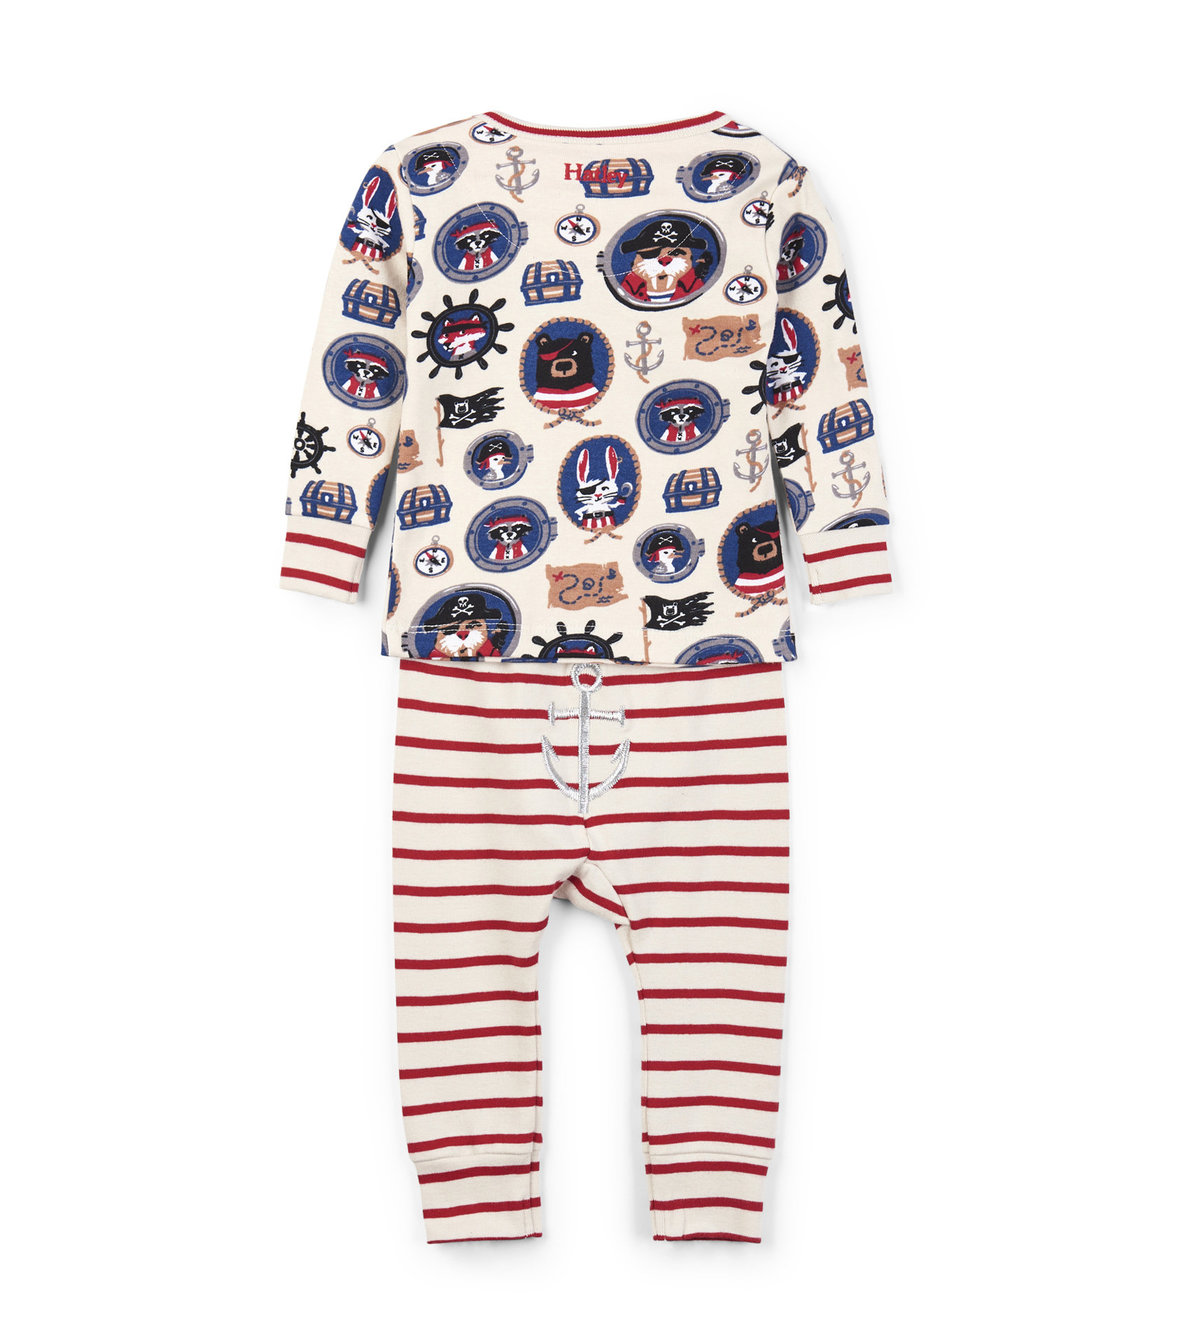 View larger image of Pirate Portraits Baby Pajama Set